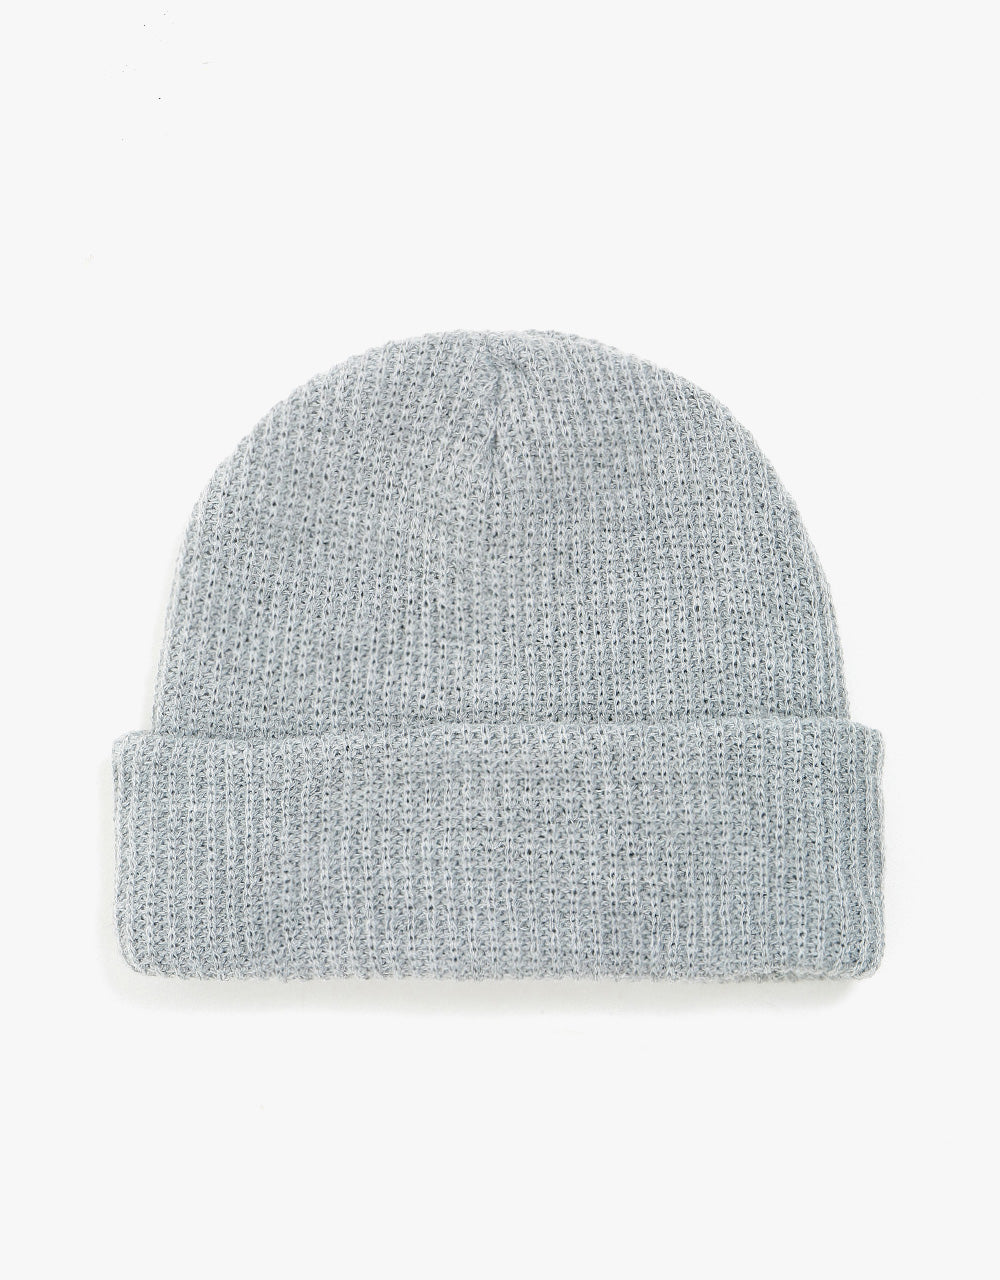 Route One Recycled Fisherman Beanie - Heather Grey